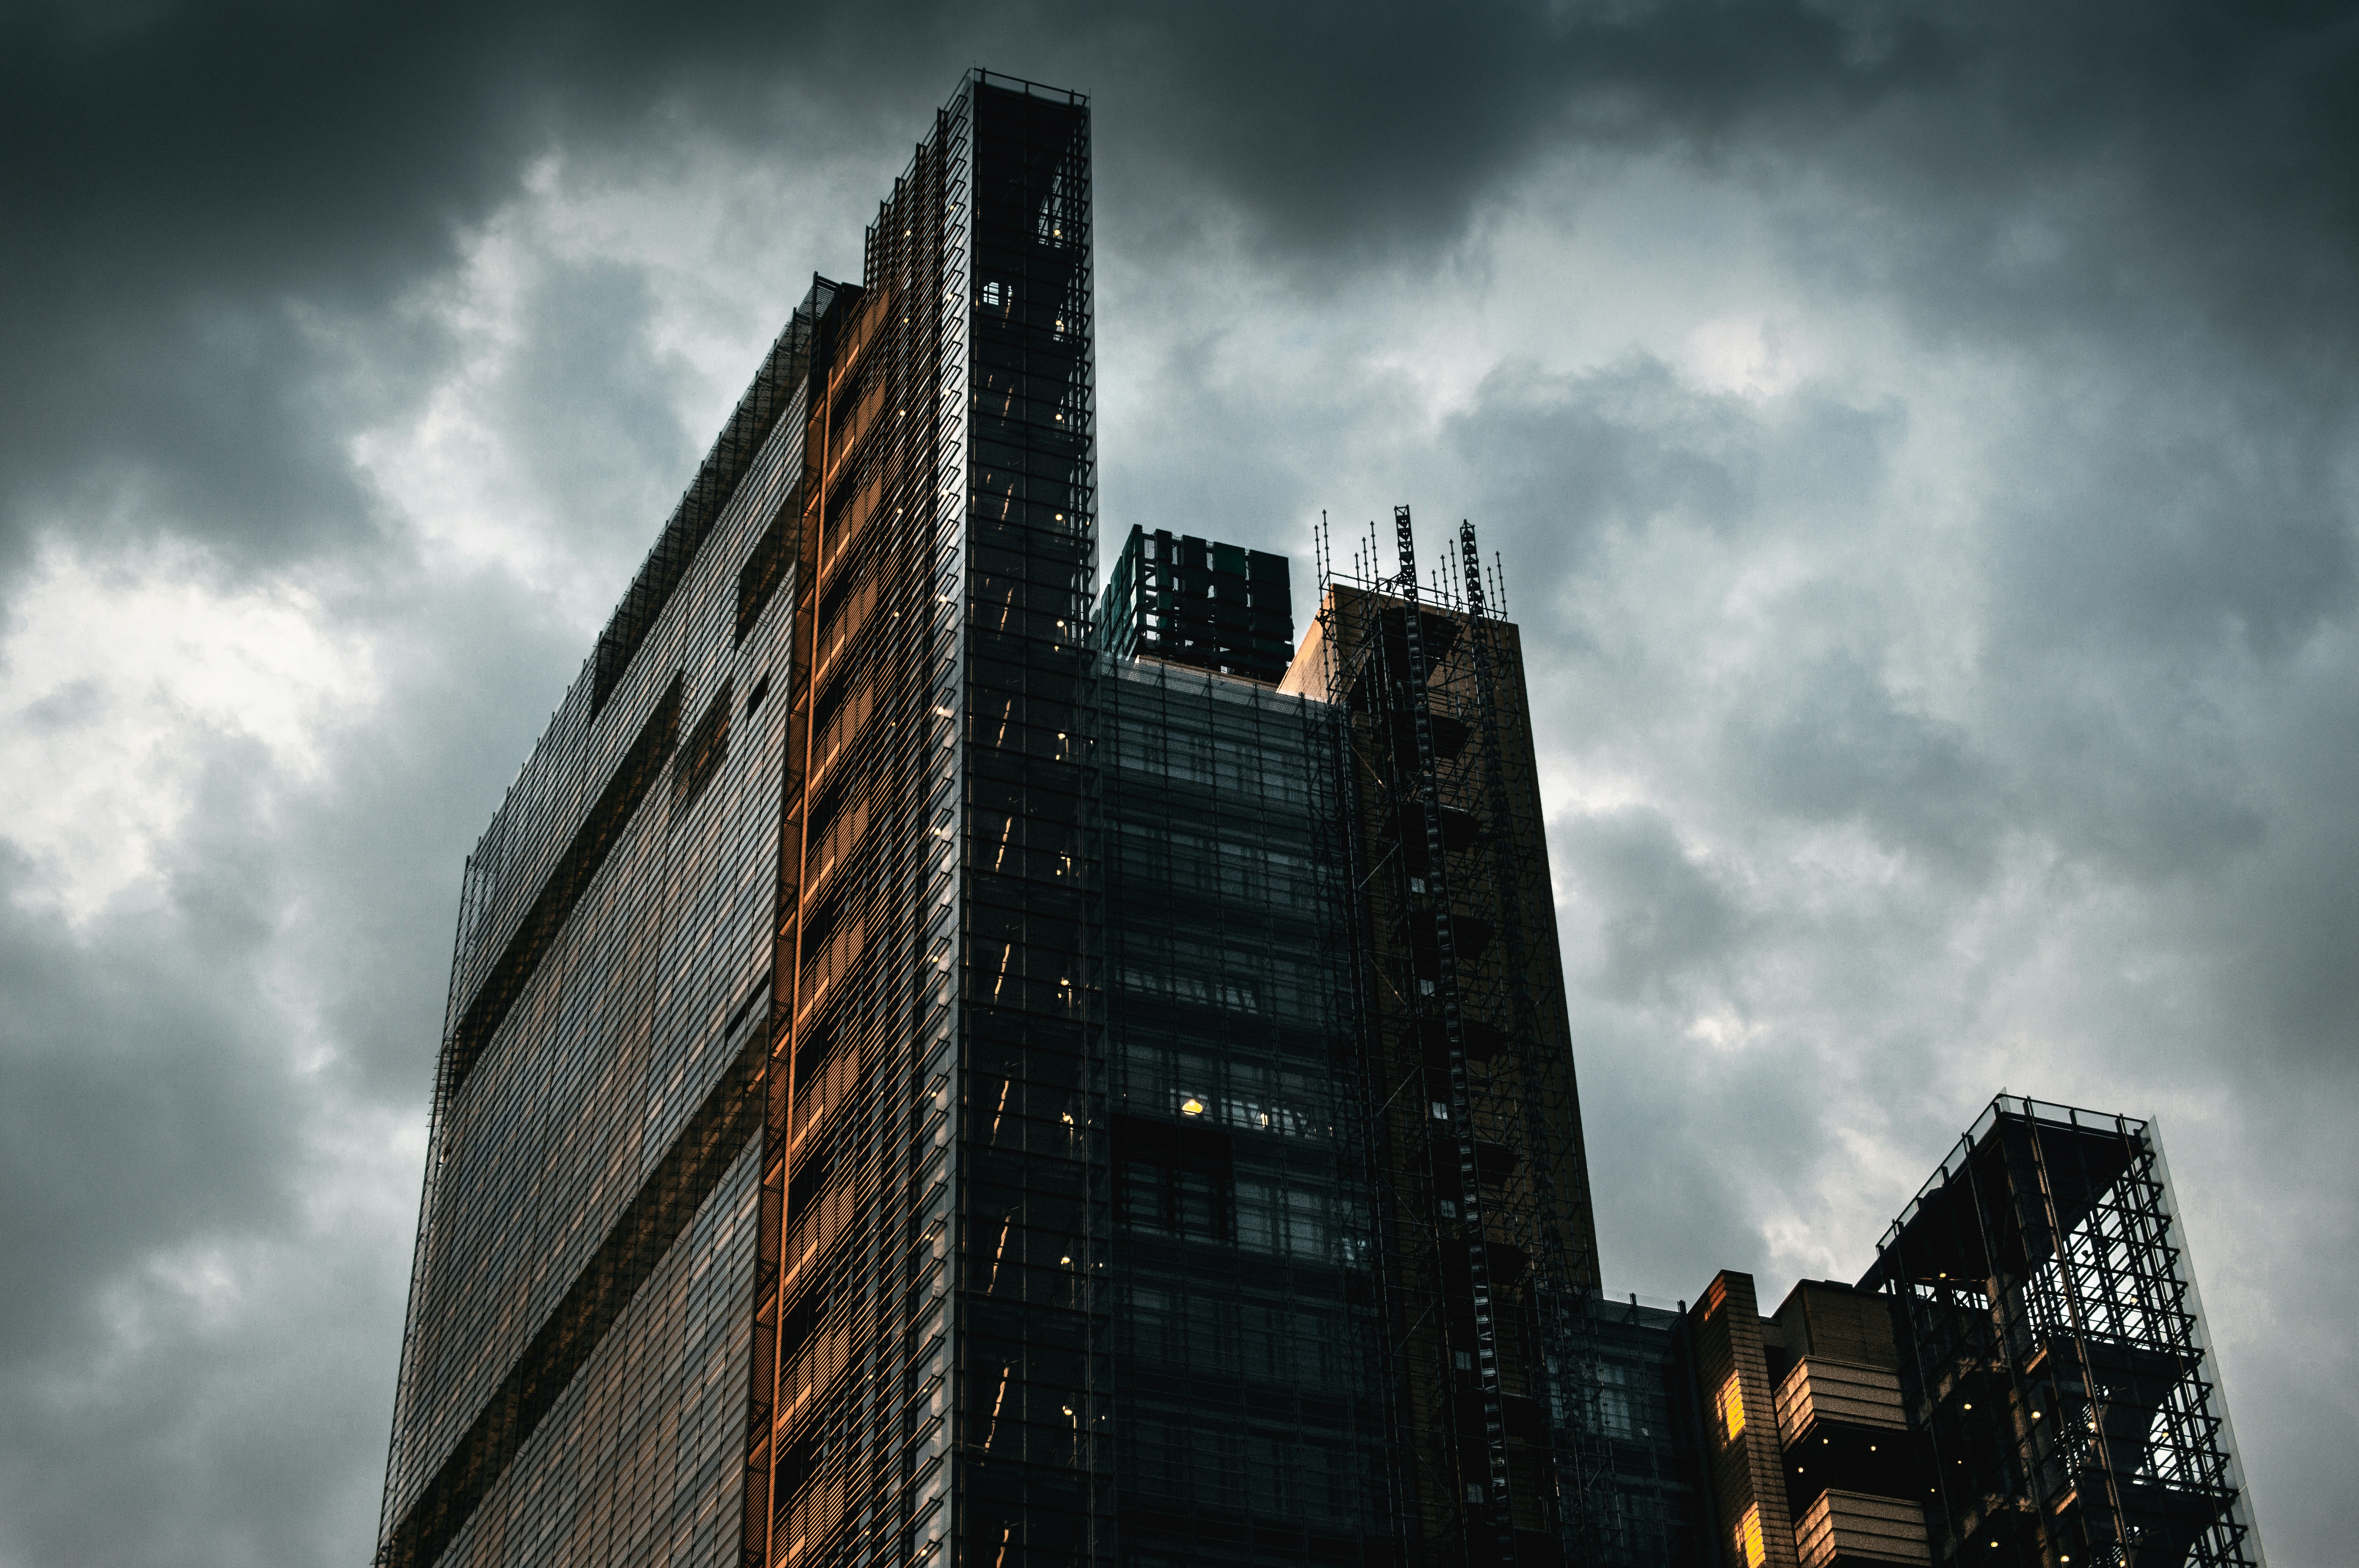 high rise building under gray clouds